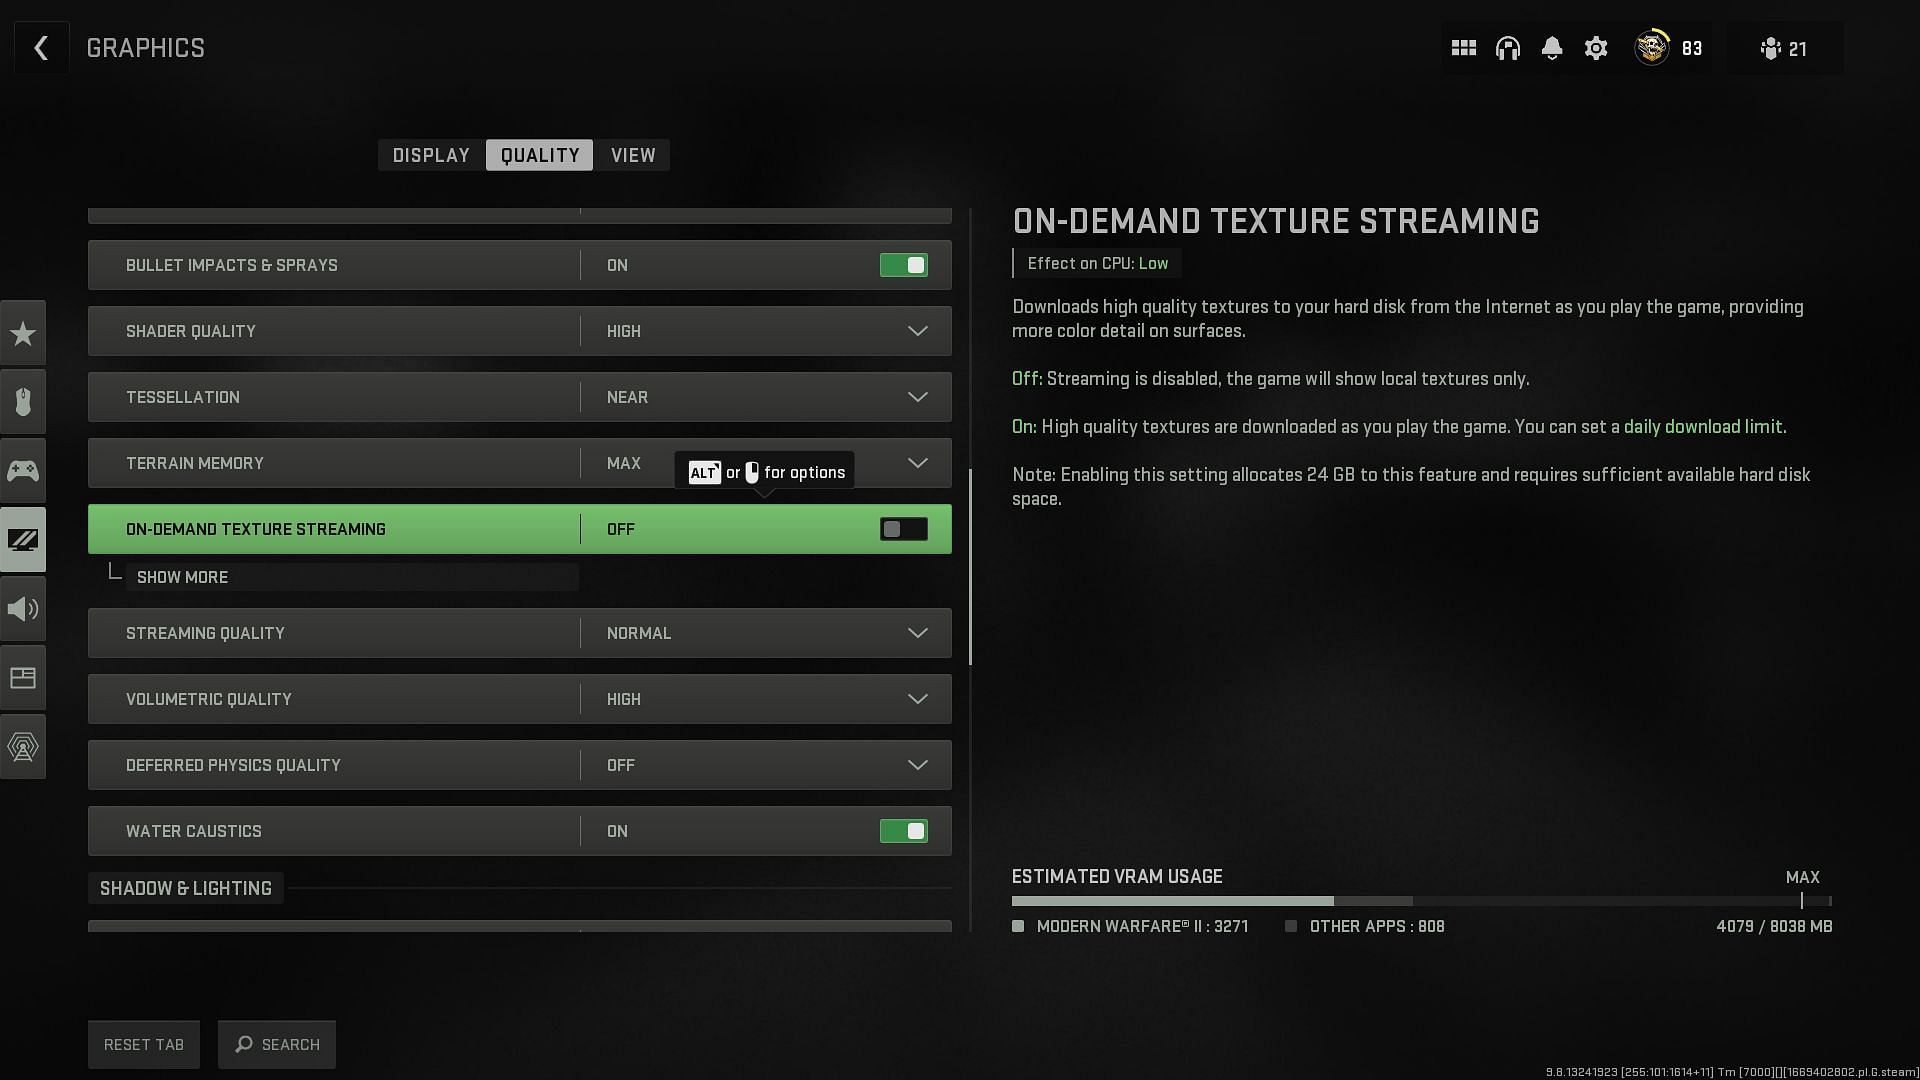 Turning off On-Demand Texture Streaming in Modern Warfare 2 (Image via Activision)